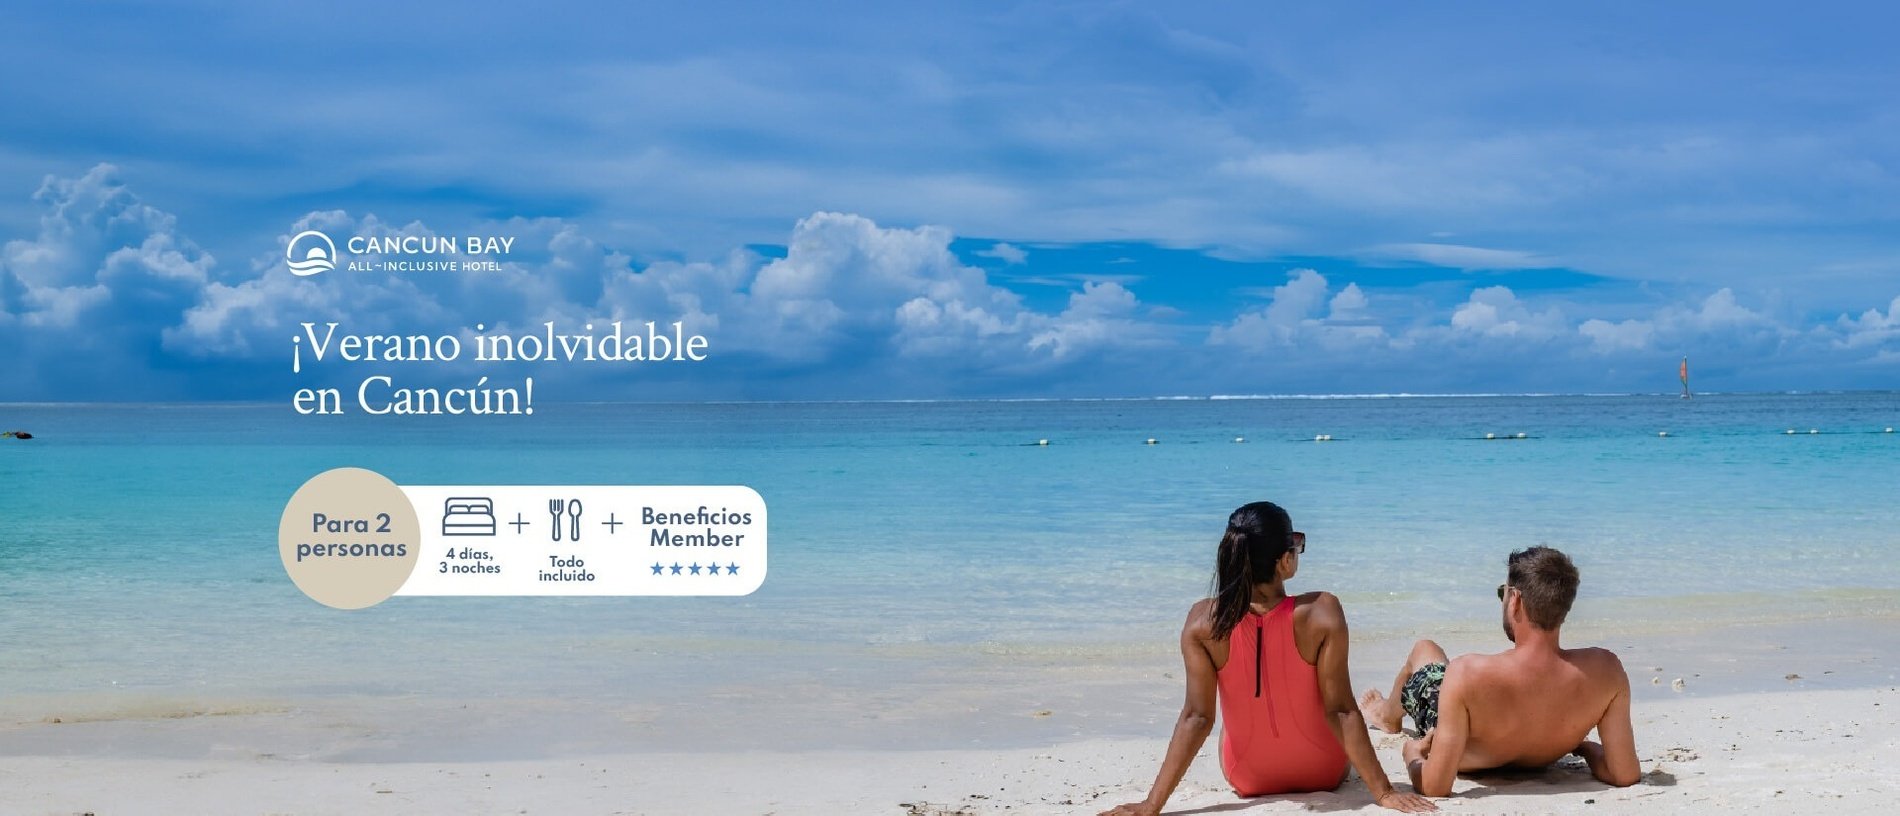 an advertisement for cancun bay shows a man and woman sitting on the beach